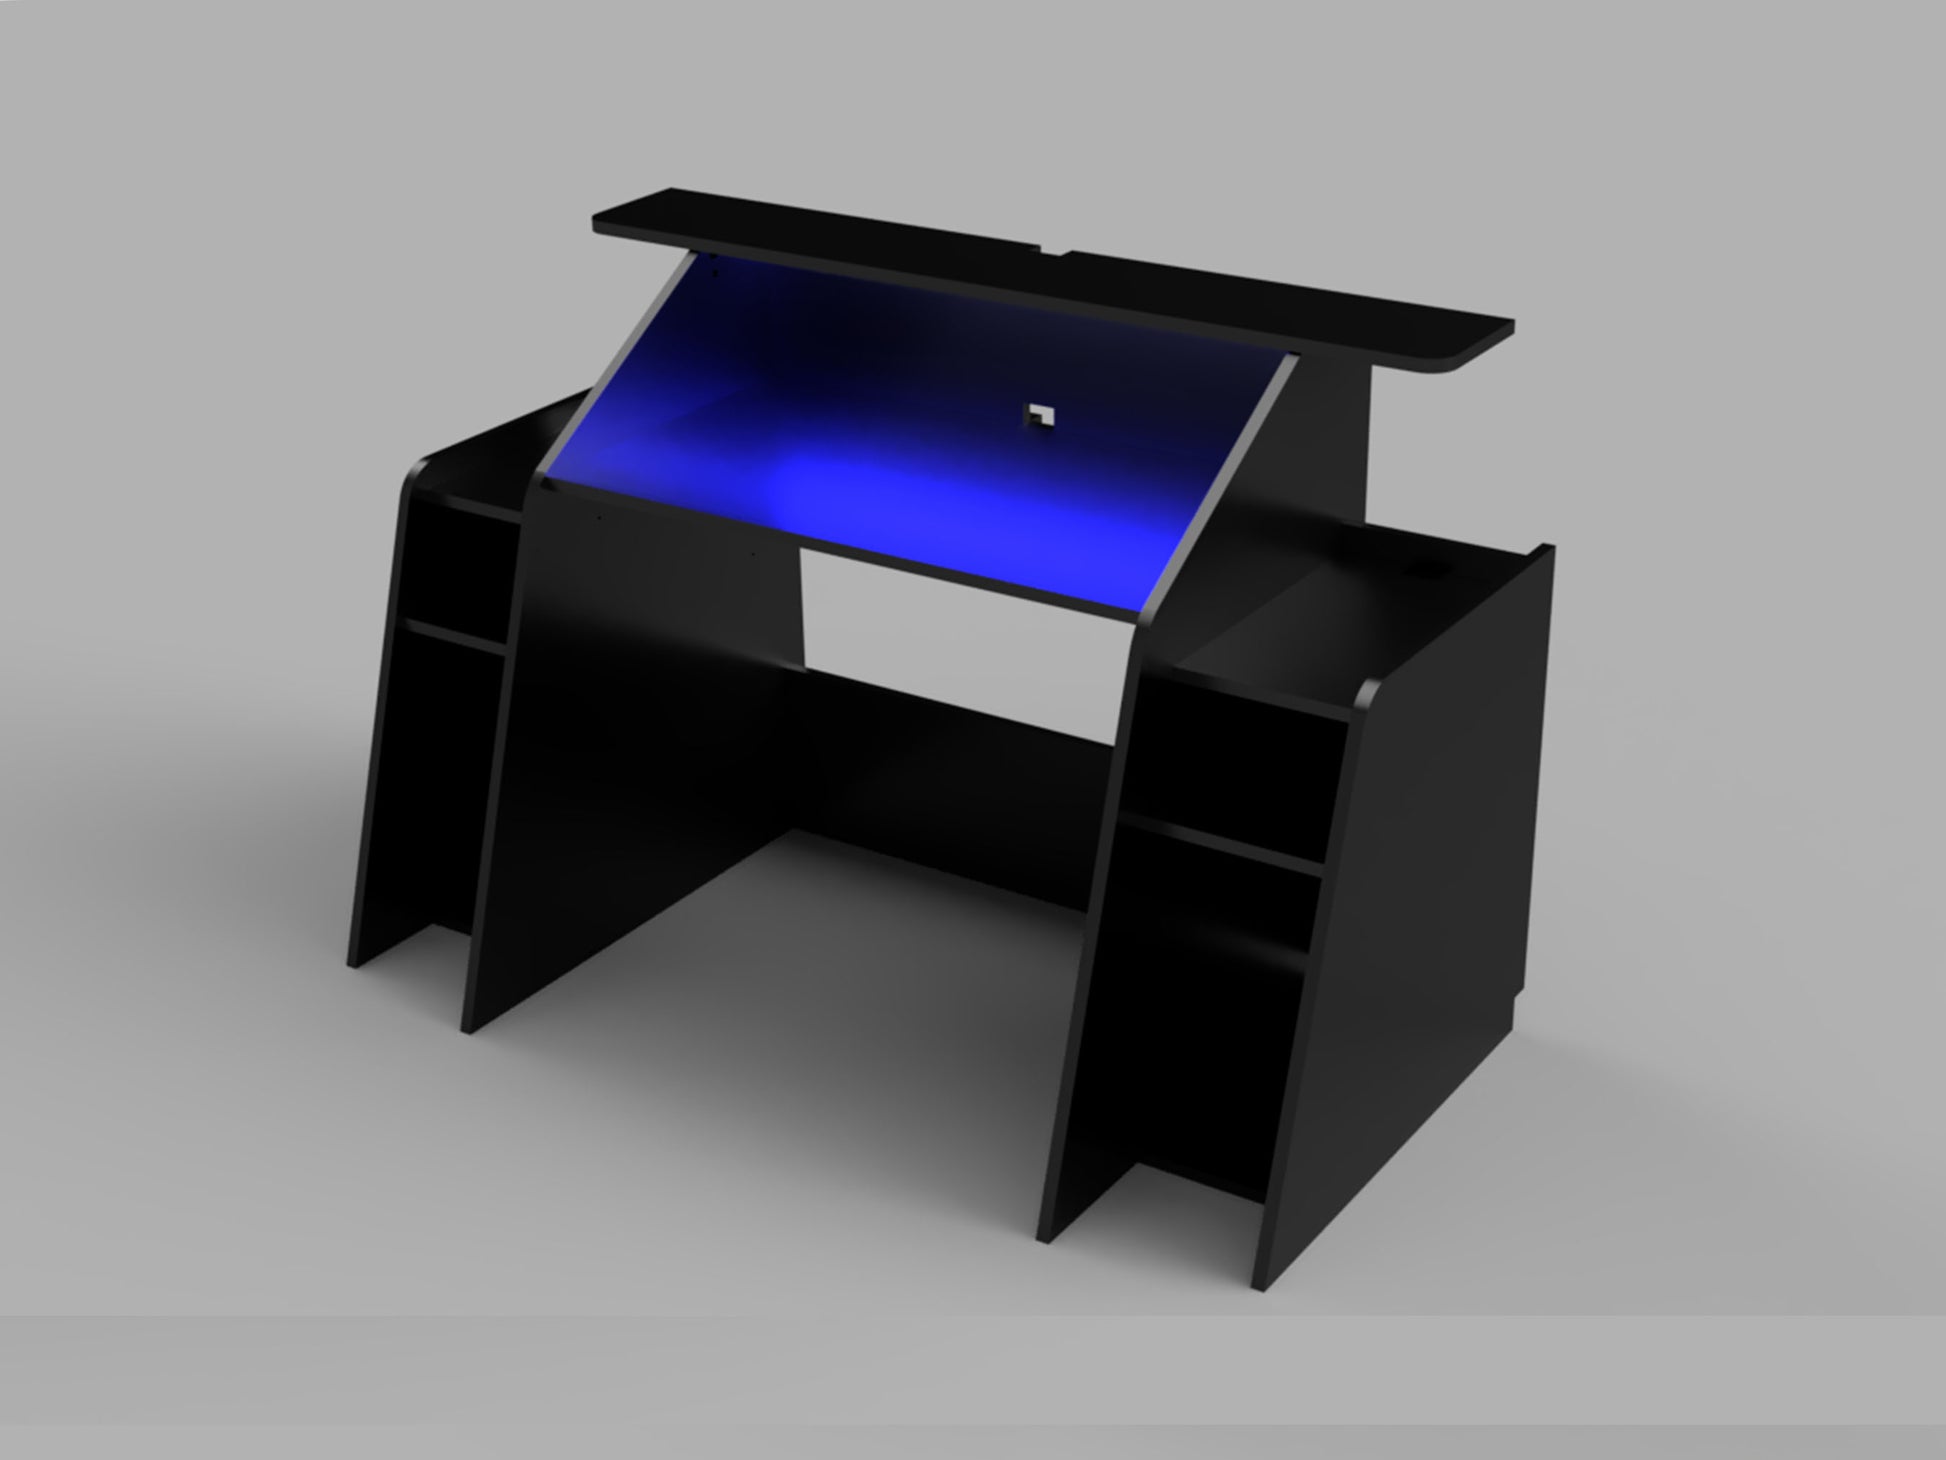 Transform your gaming setup into a powerhouse with the ultimate gaming desk - Nebula Gaming Desk. Engineered for performance and designed with gamers in mind, this desk is your ticket to domination on the virtual battlefield.